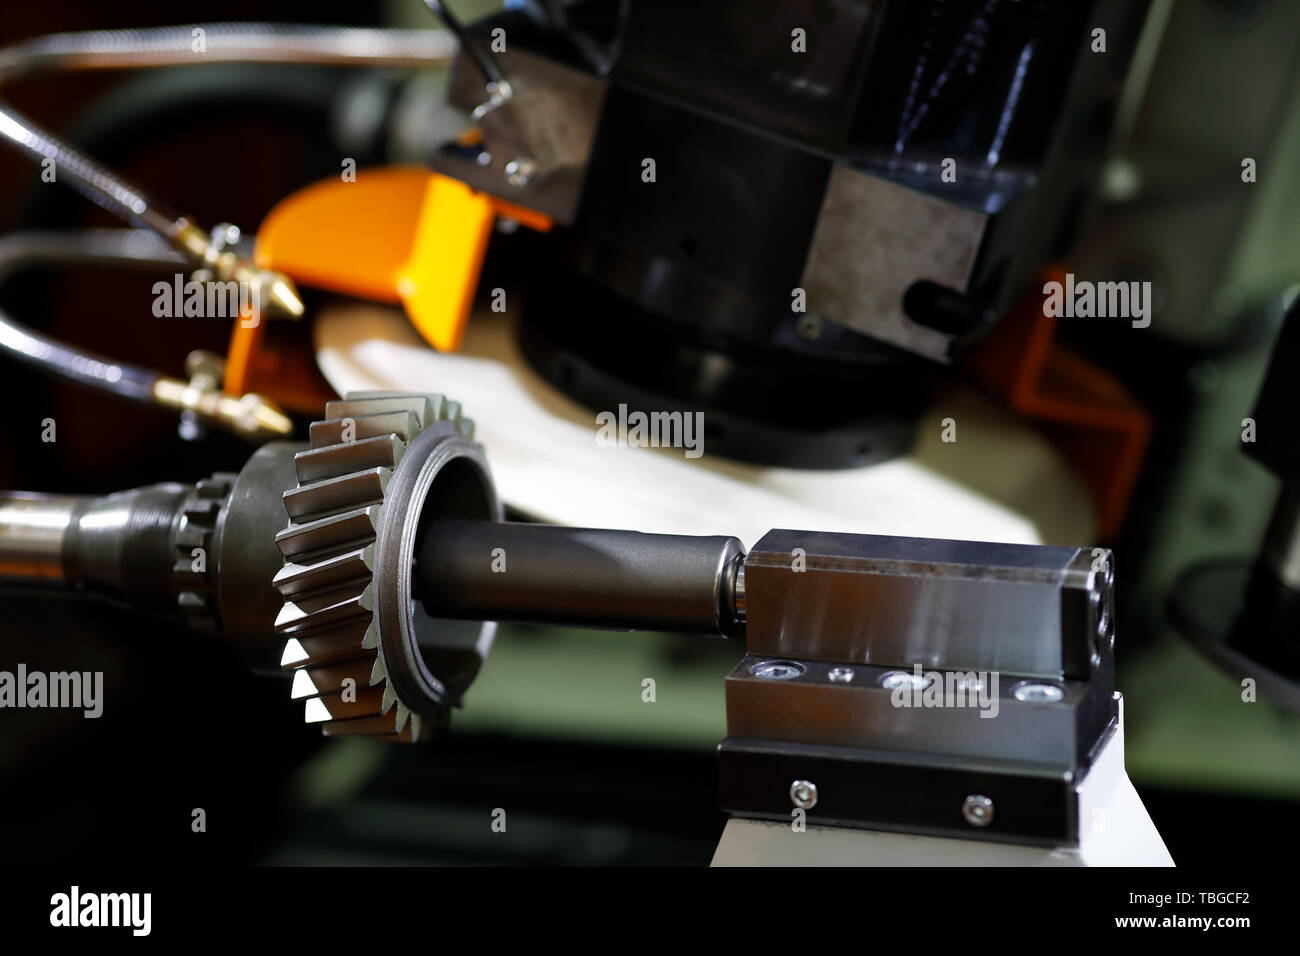 CNC gear form grinding machine. Grinding a gear wheel. Selective focus. Stock Photo